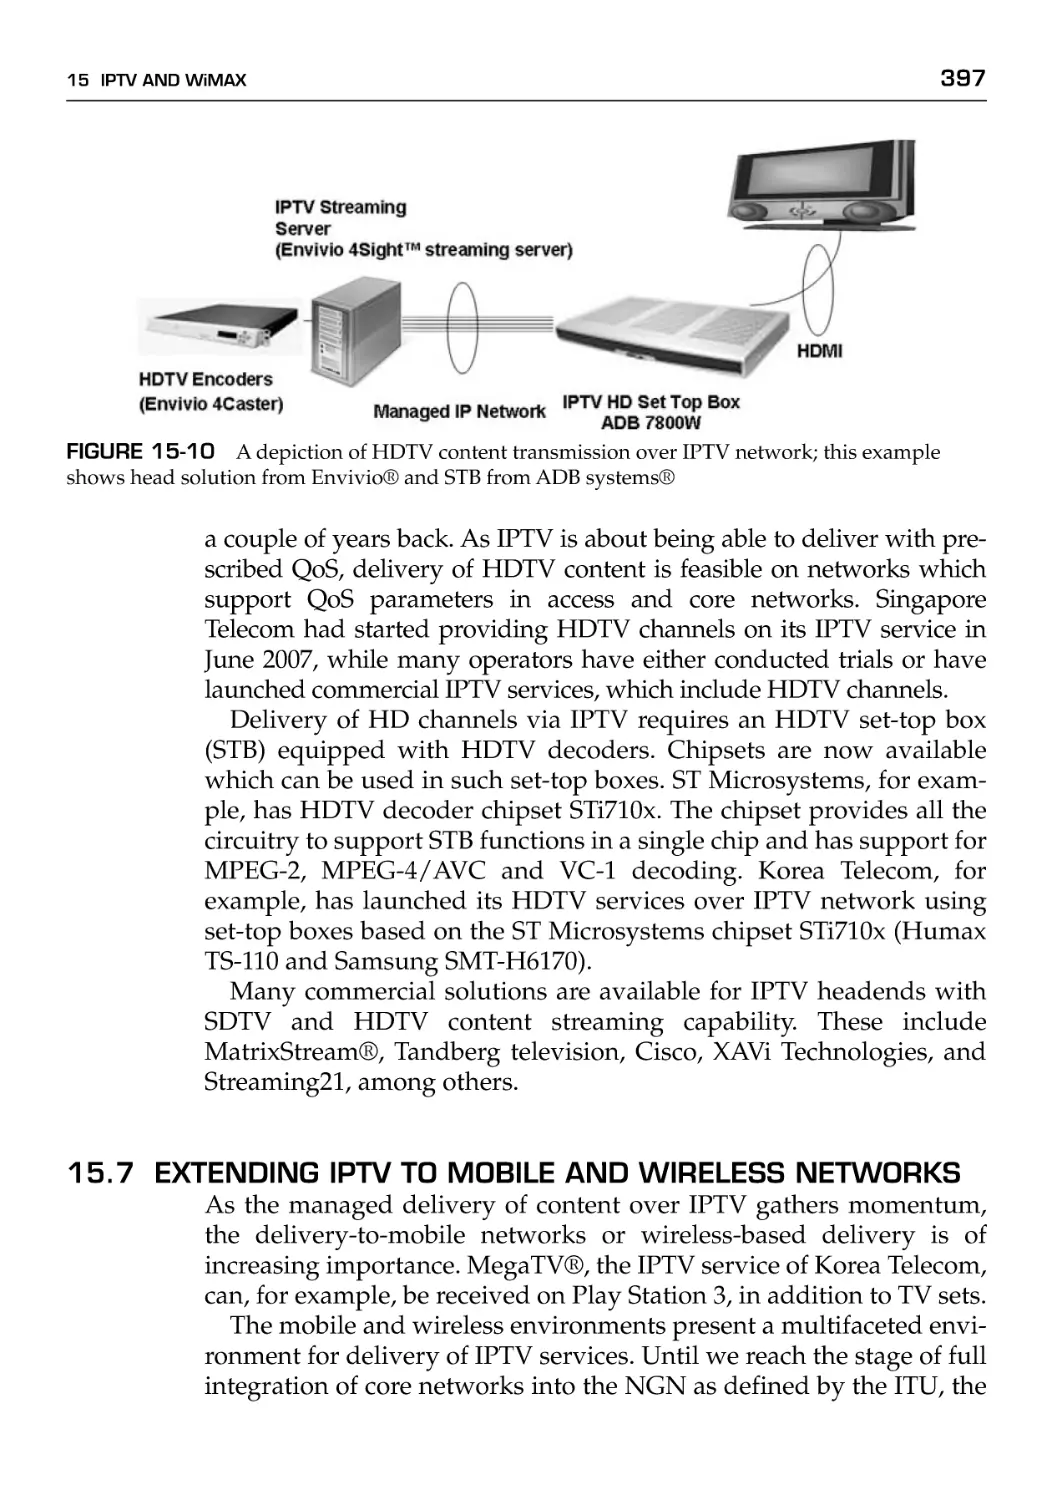 15.7 Extending IPTV to Mobile and Wireless Networks